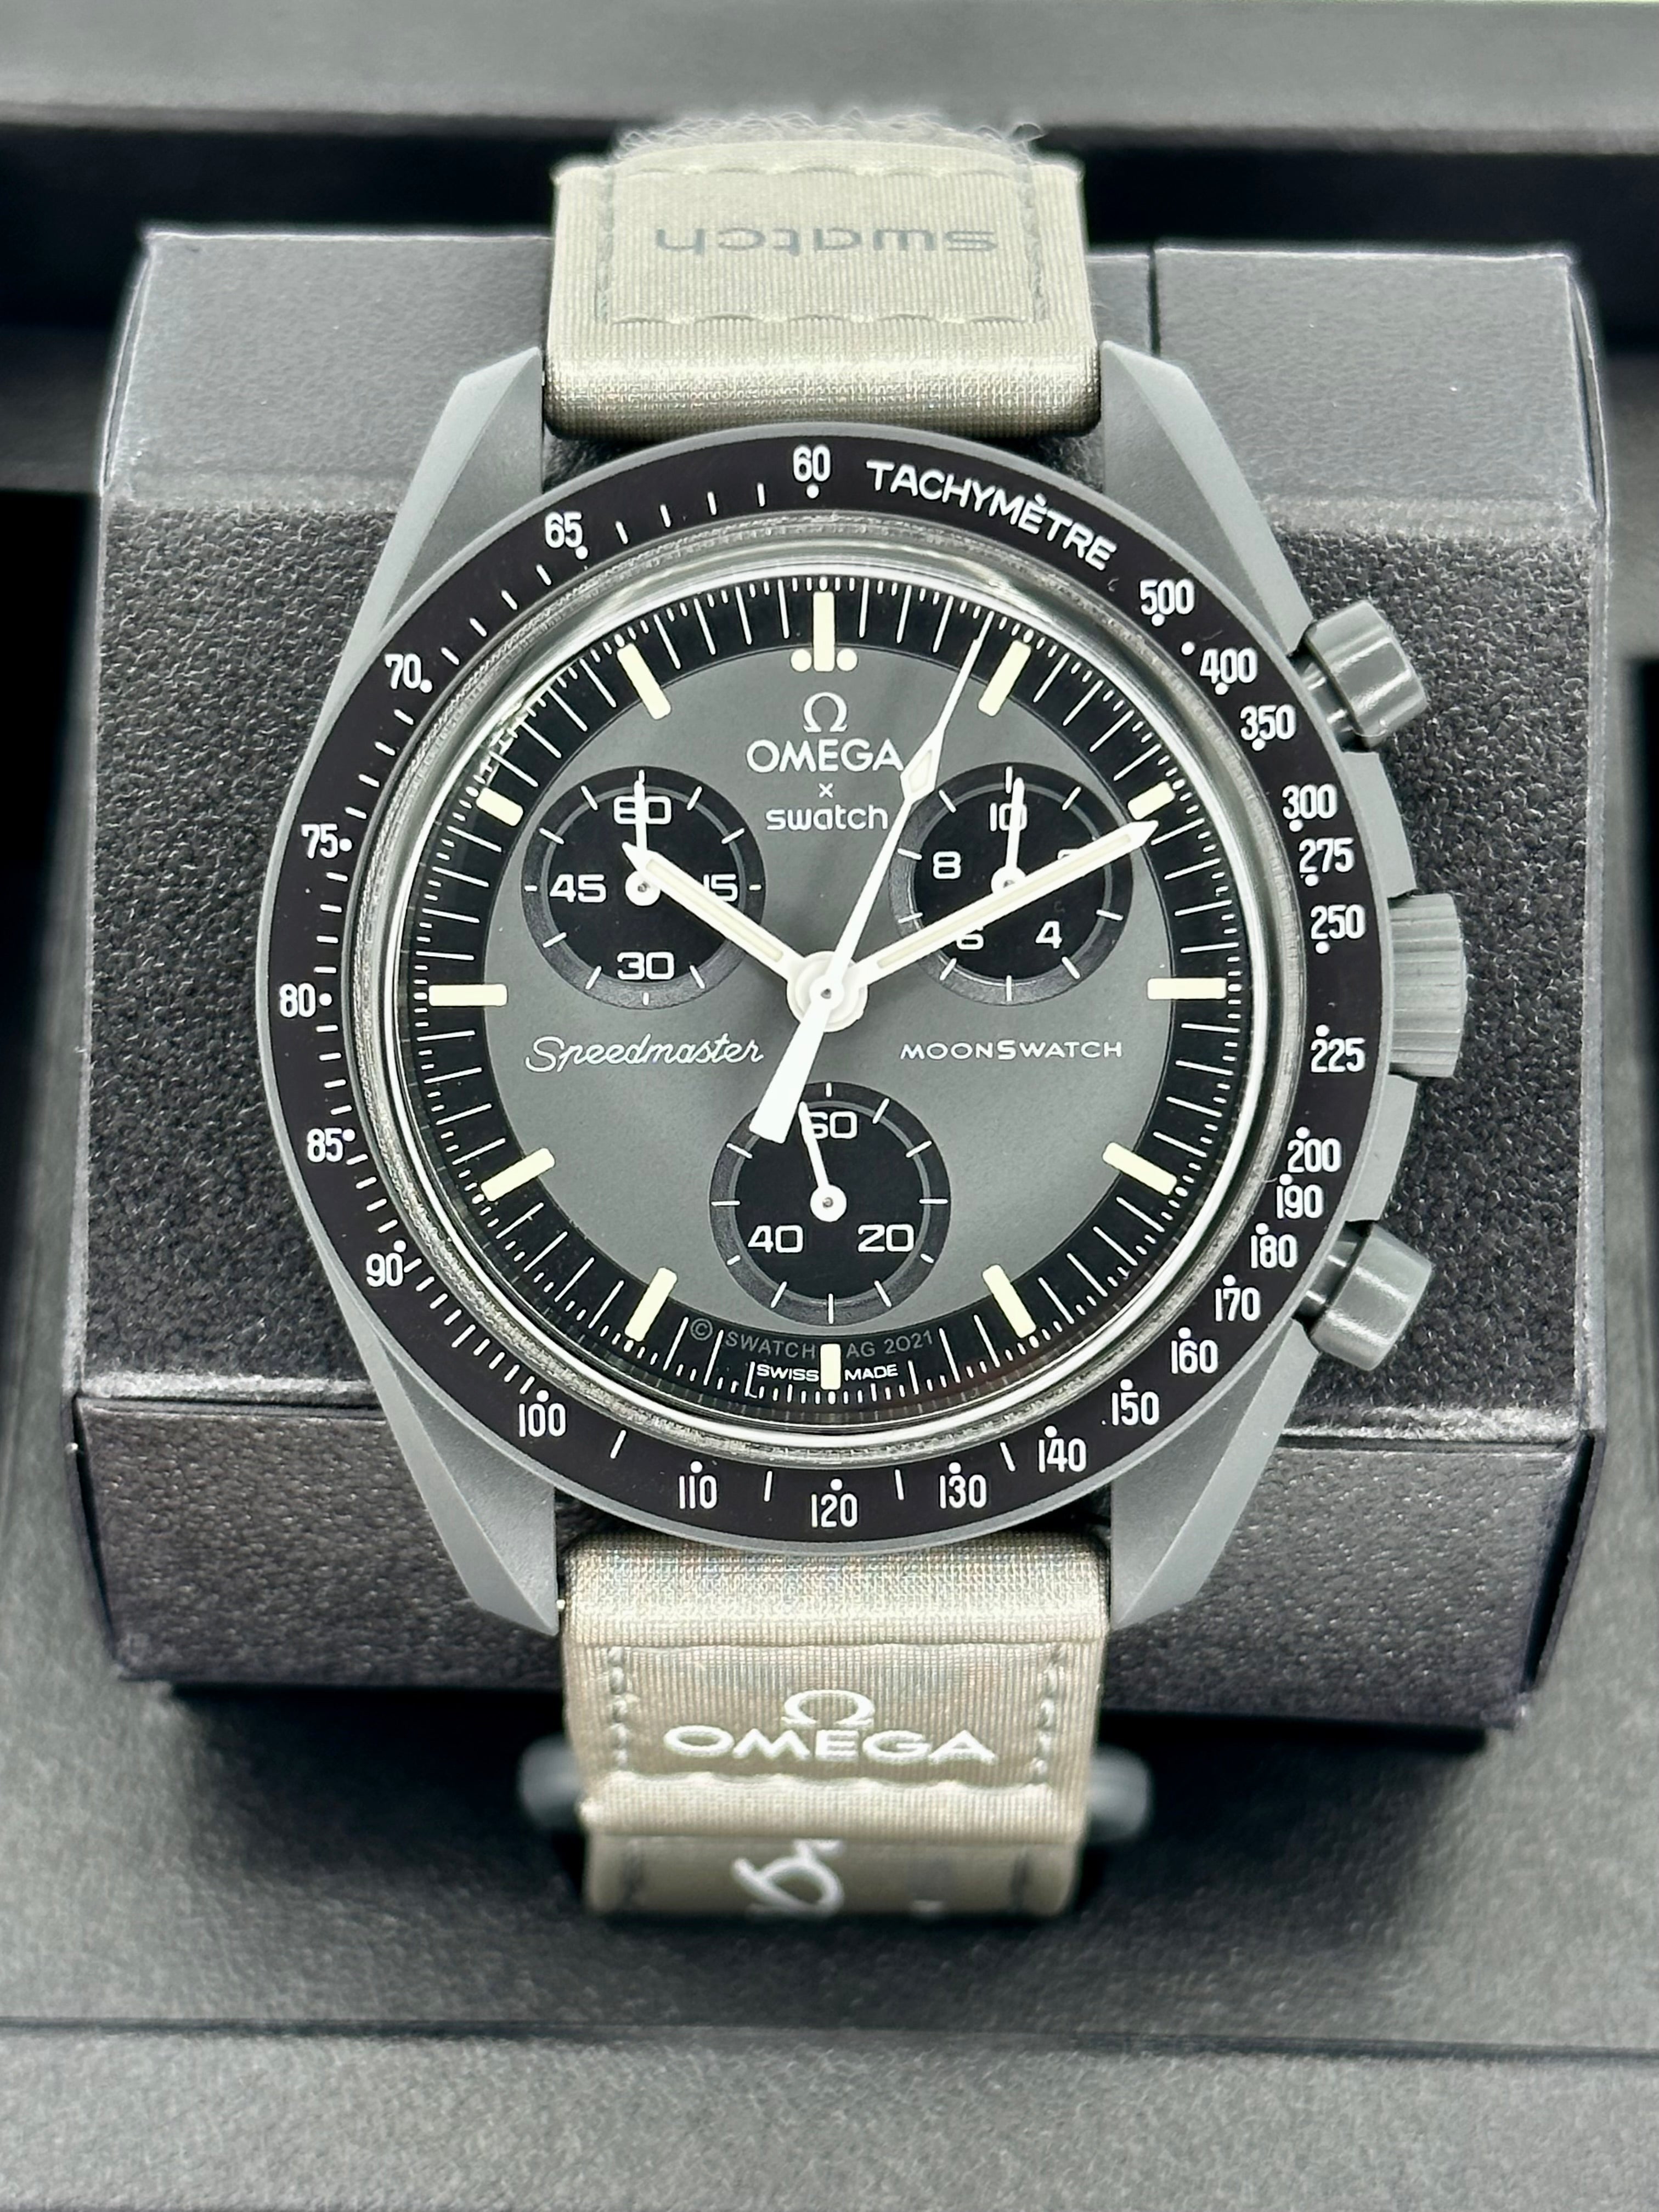 NEW Omega S033A100 Bioceramic Moon Swatch - Mission to Mercury